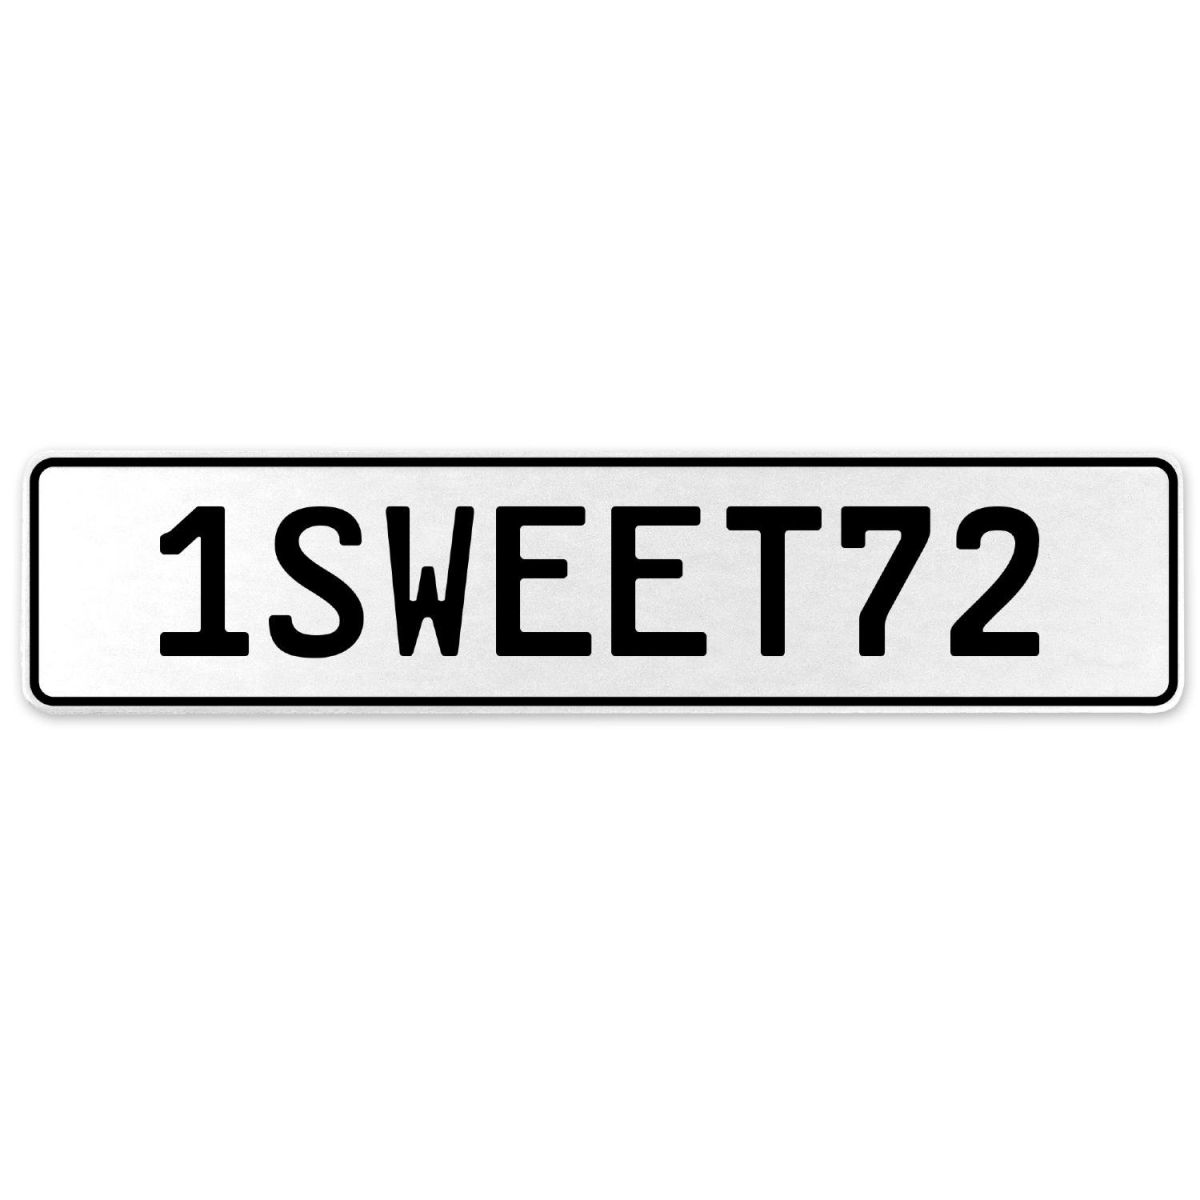 554273 1sweet72 - White Aluminum Street Sign Mancave Euro Plate Name Door Sign Wall